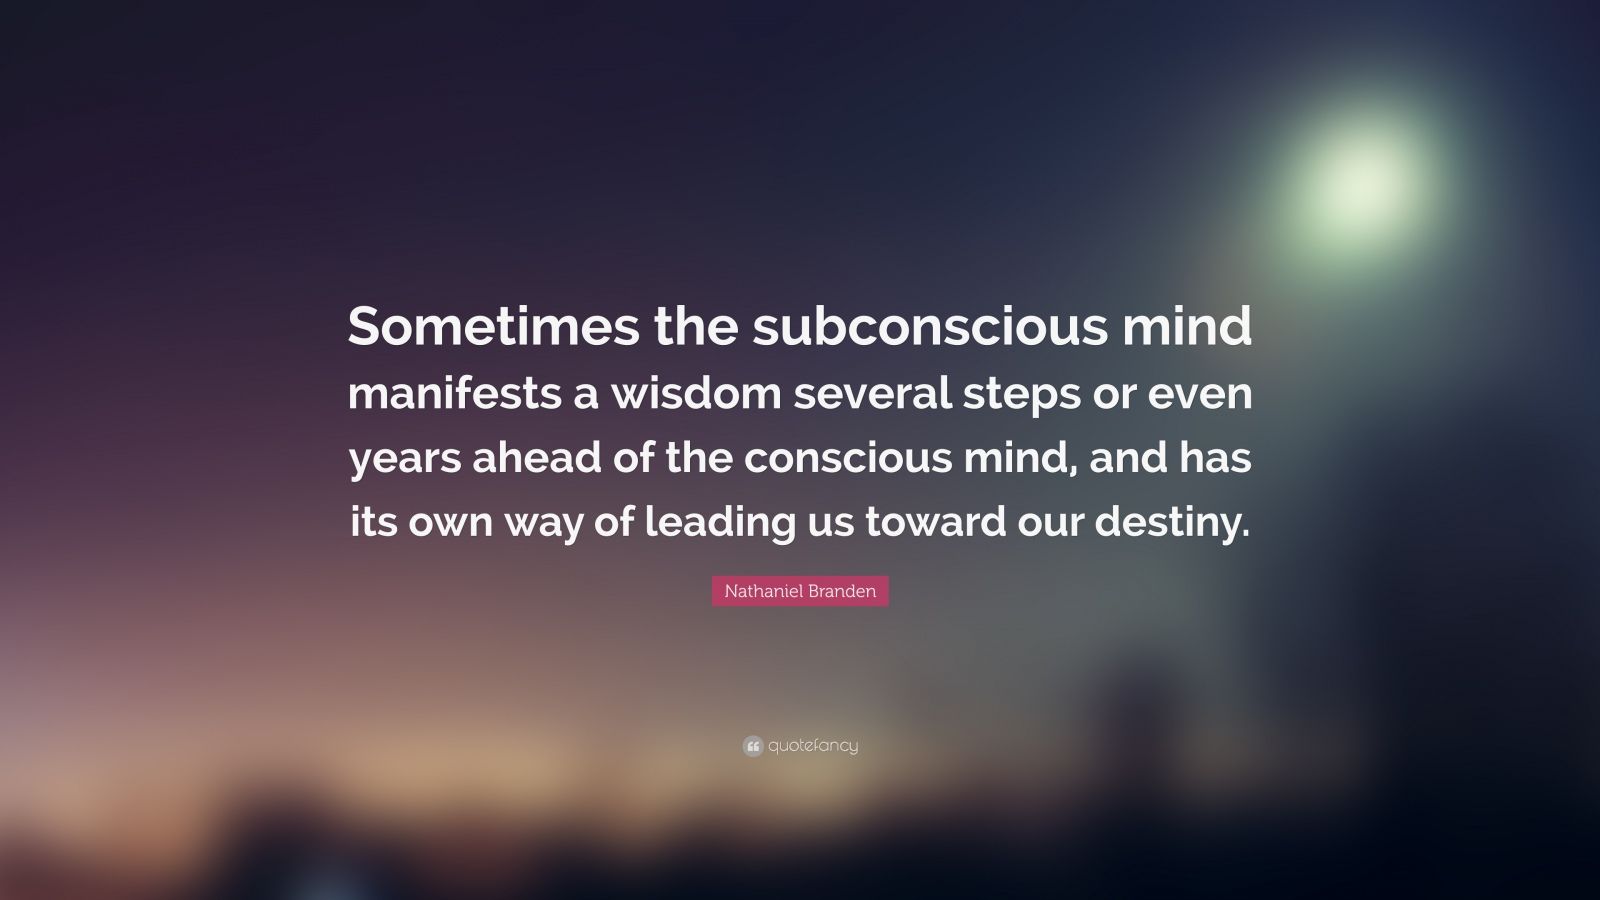 Nathaniel Branden Quote: “Sometimes the subconscious mind manifests a wisdom several steps or even years ahead of the conscious mind, and has its .”